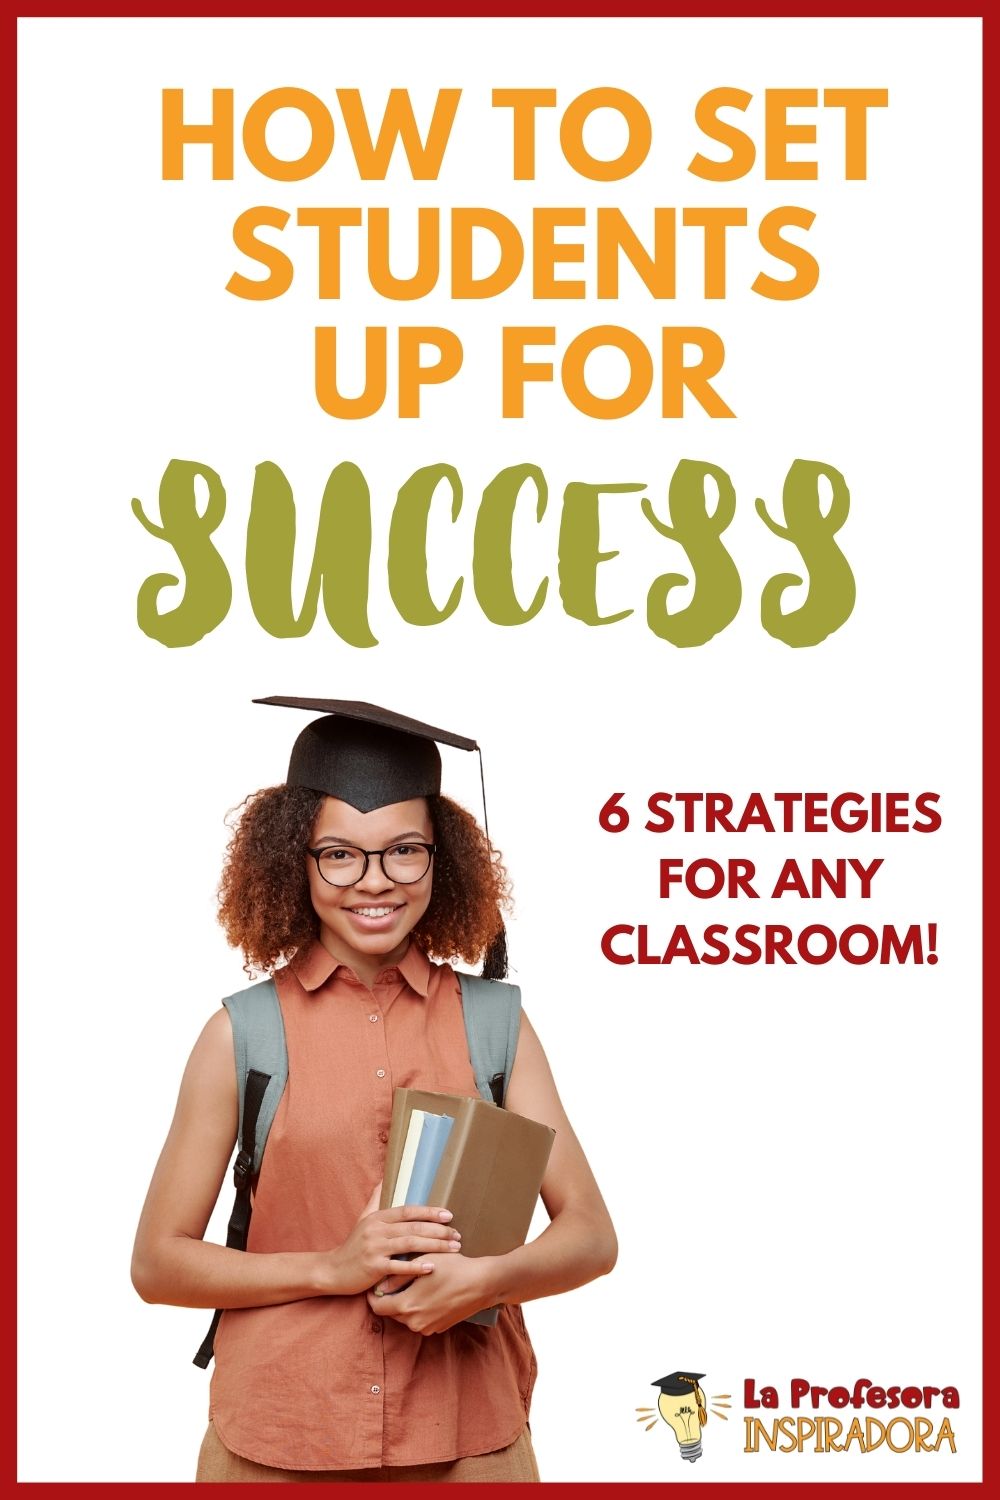 Pin Image for Blog Post on Setting Students Up For Success